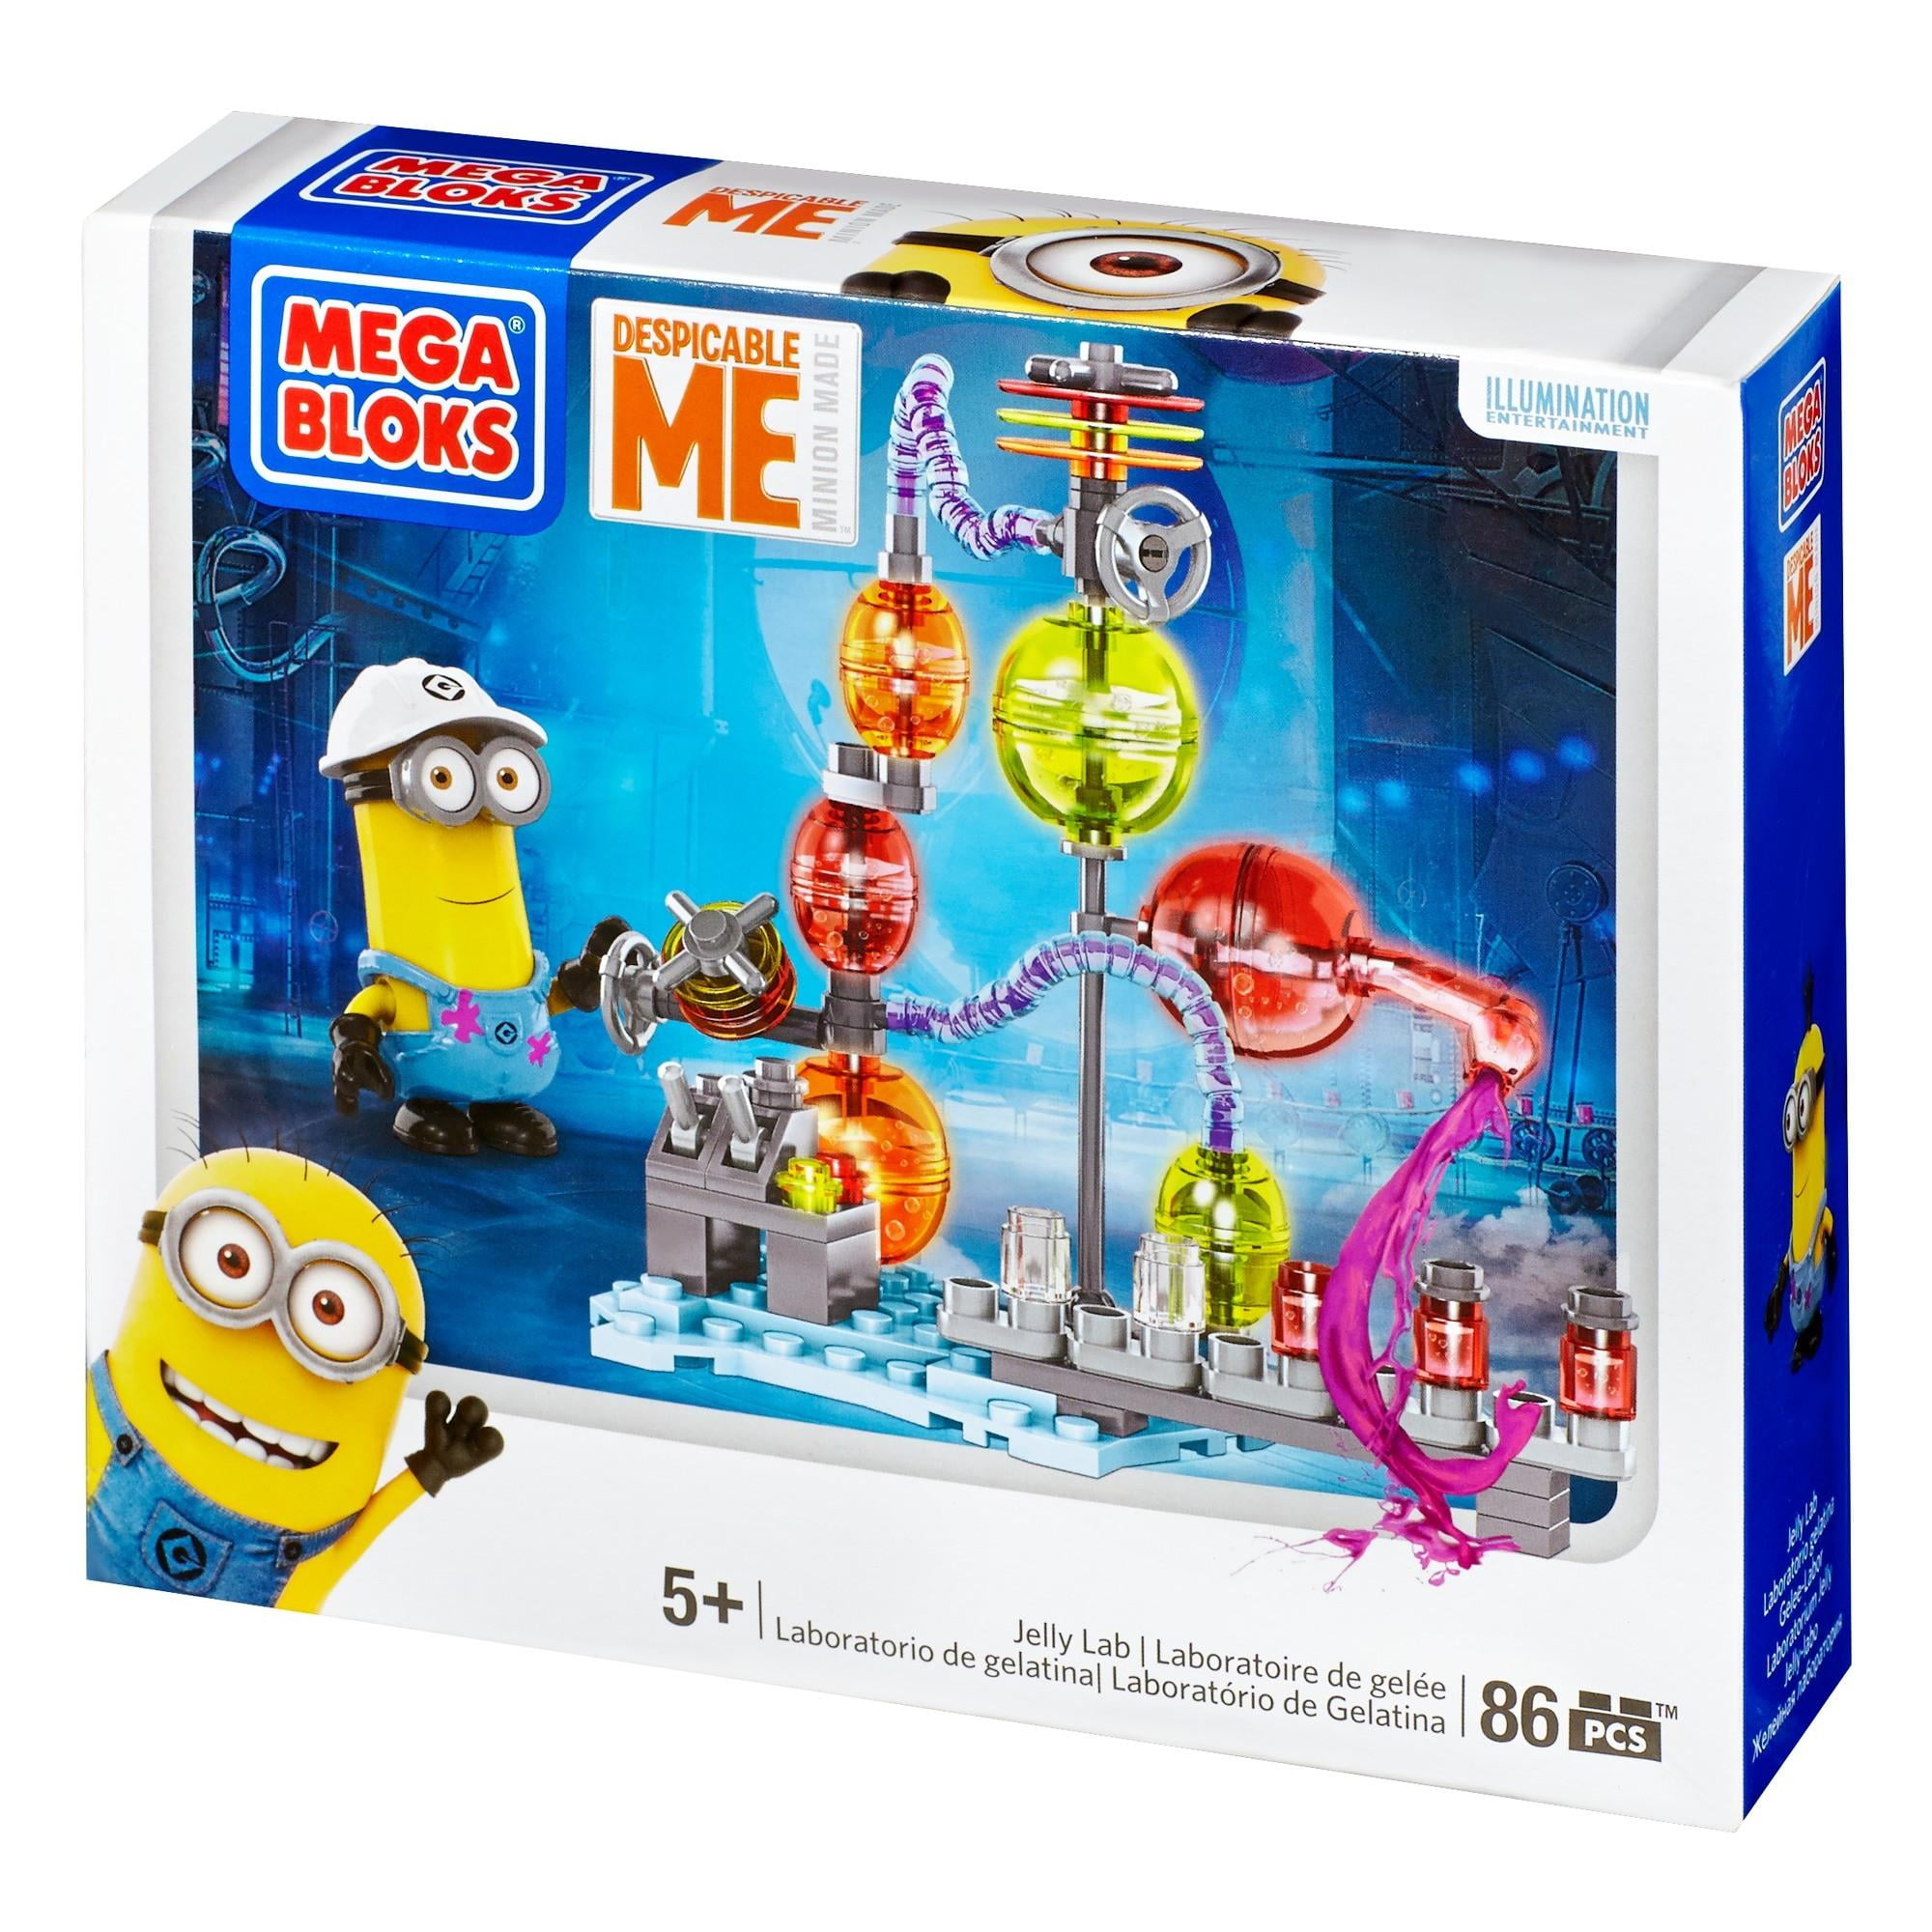 Mega Bloks Despicable Me Jelly Lab Free Shipping 